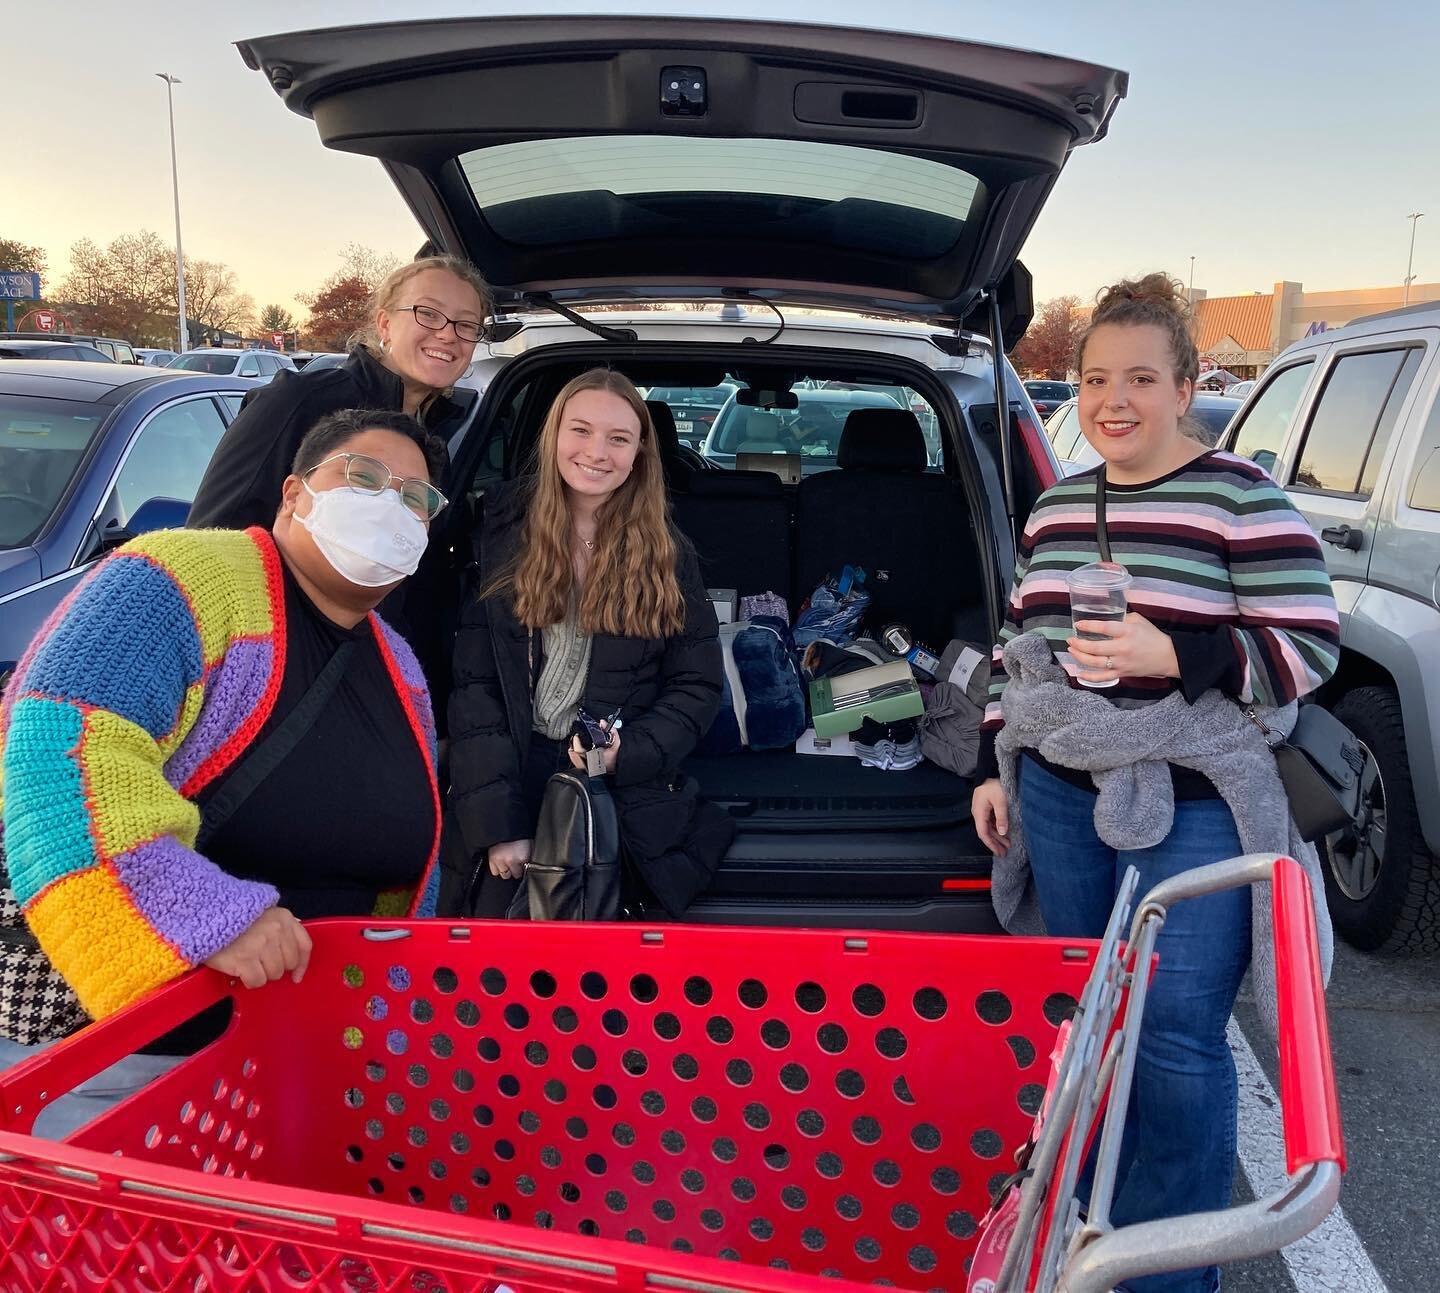 Christmas shopping for families in need was a joy today!